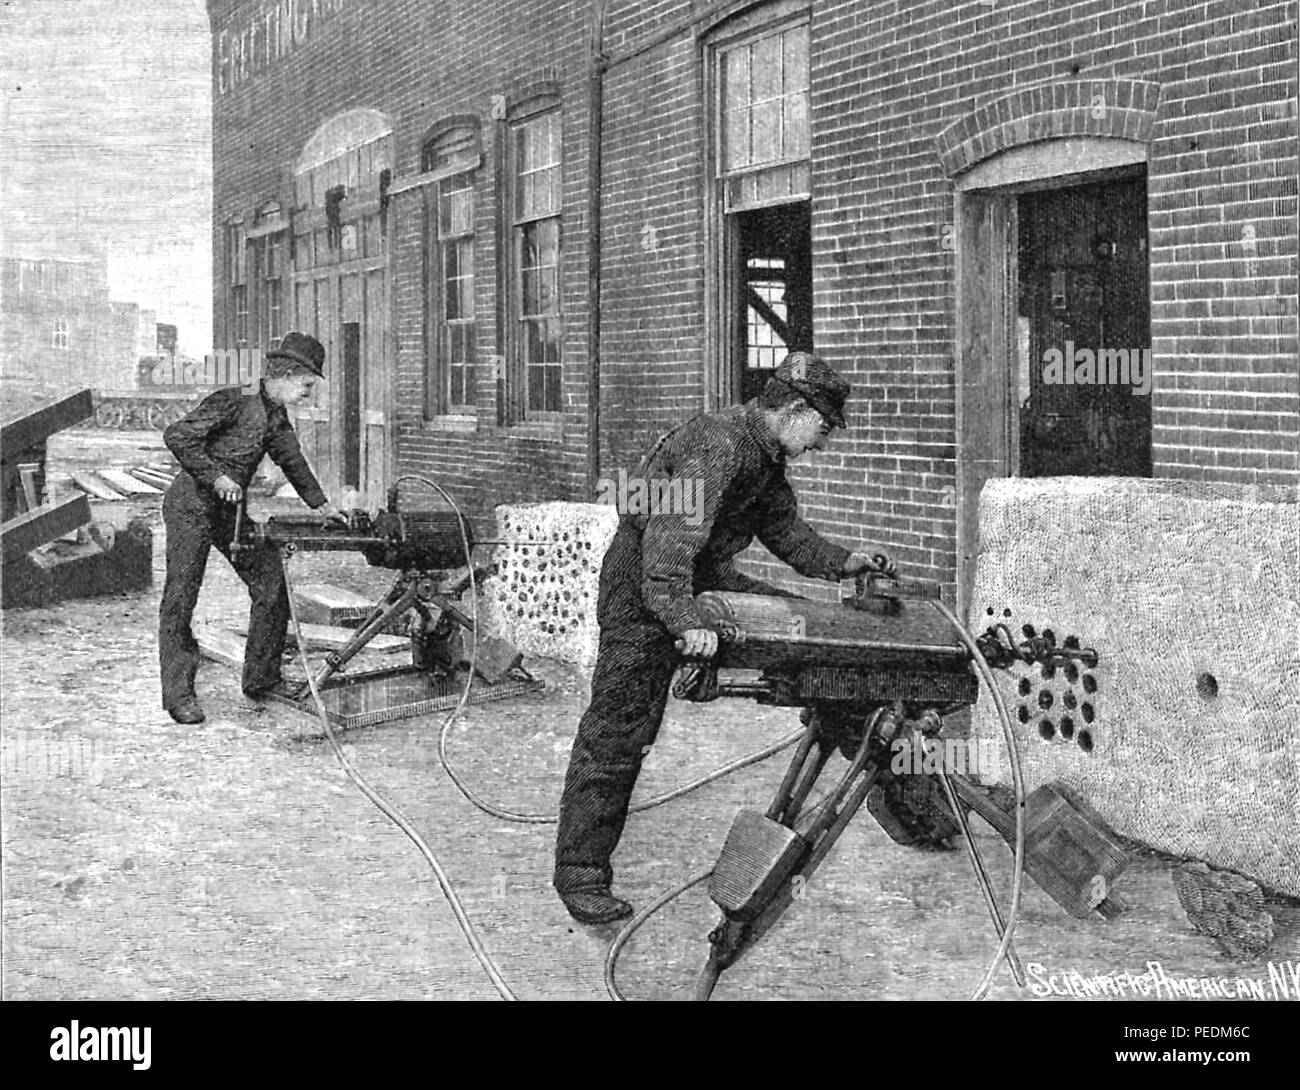 Black and white engraving showing two men using a pair of Edison Electric Rock Drills to drill into stone slabs mounted at the base of a large brick building, from Volume 65, Number 20 of the journal 'Scientific American', 1891. Courtesy Internet Archive. () Stock Photo